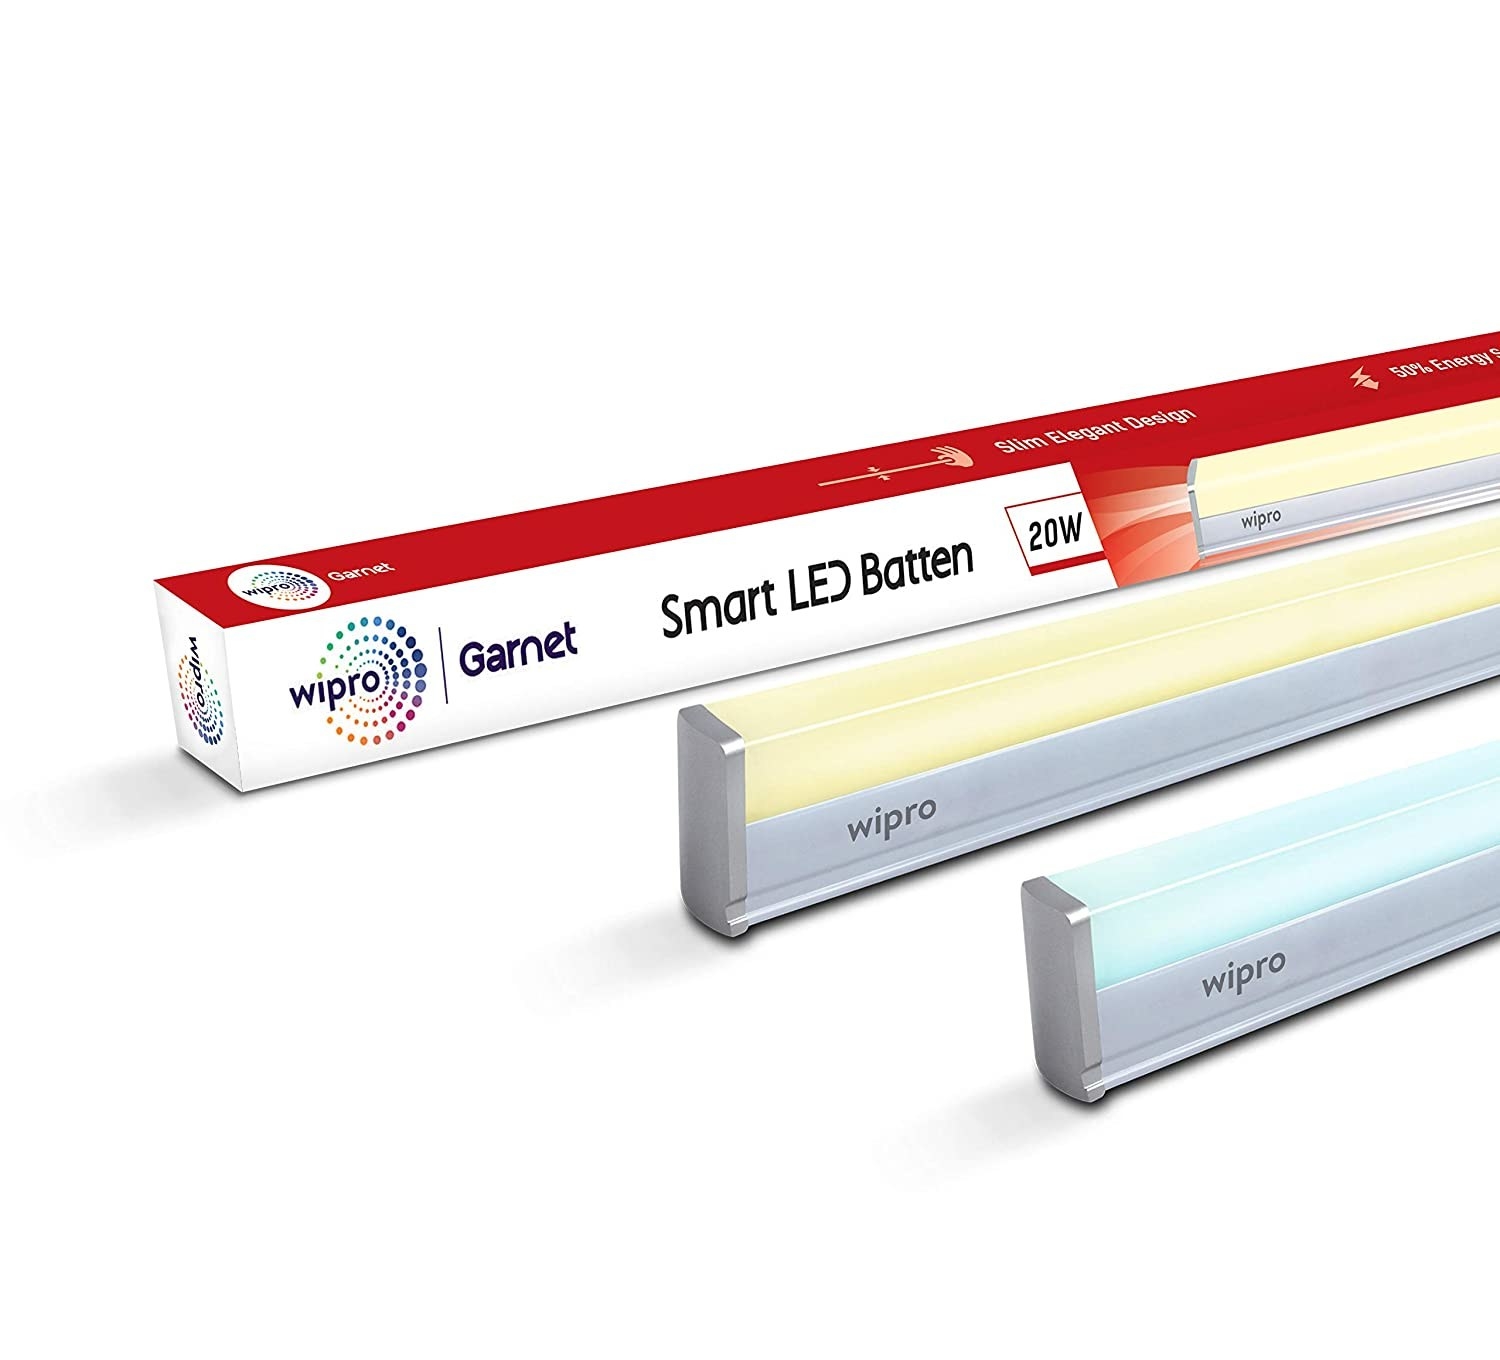 Two Wipro Smart LED Battens next to their box.